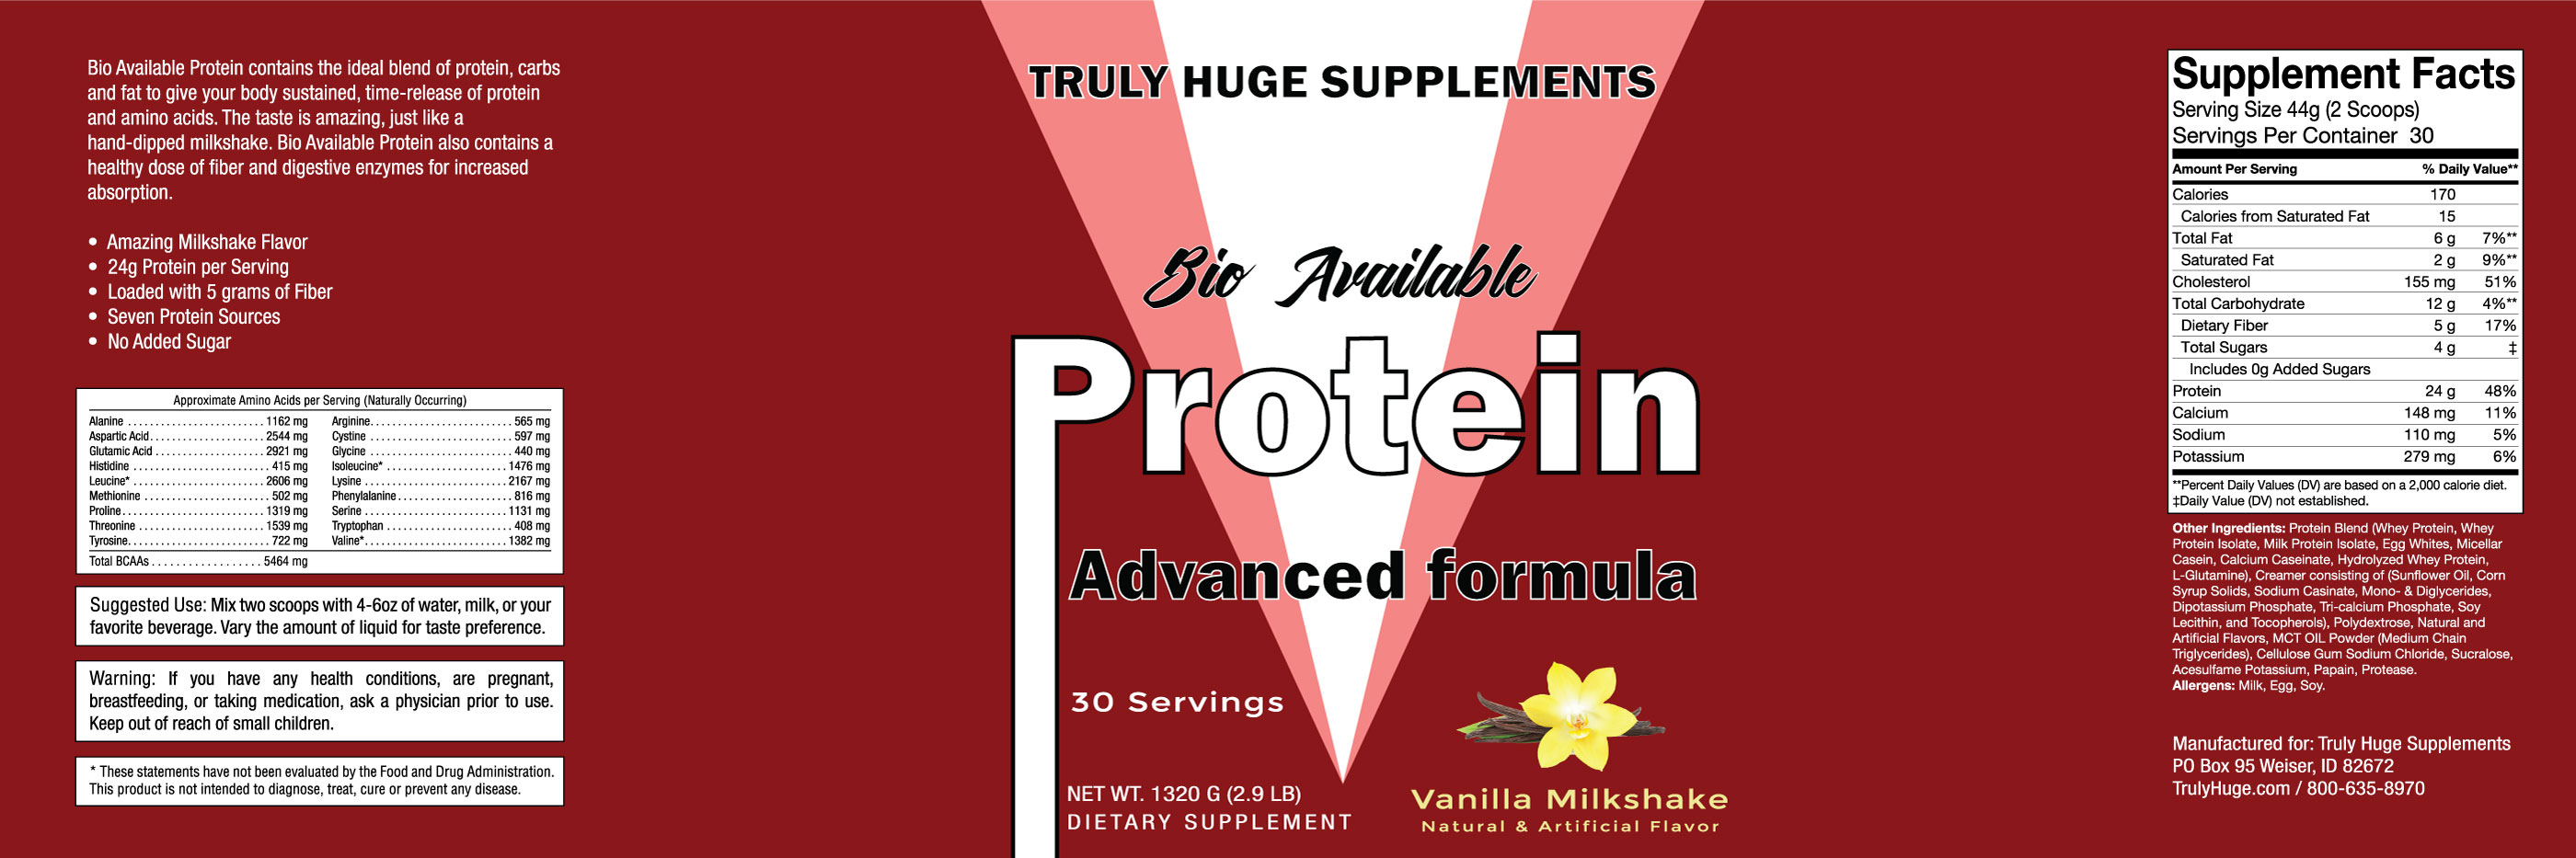 Bio-Available Protein